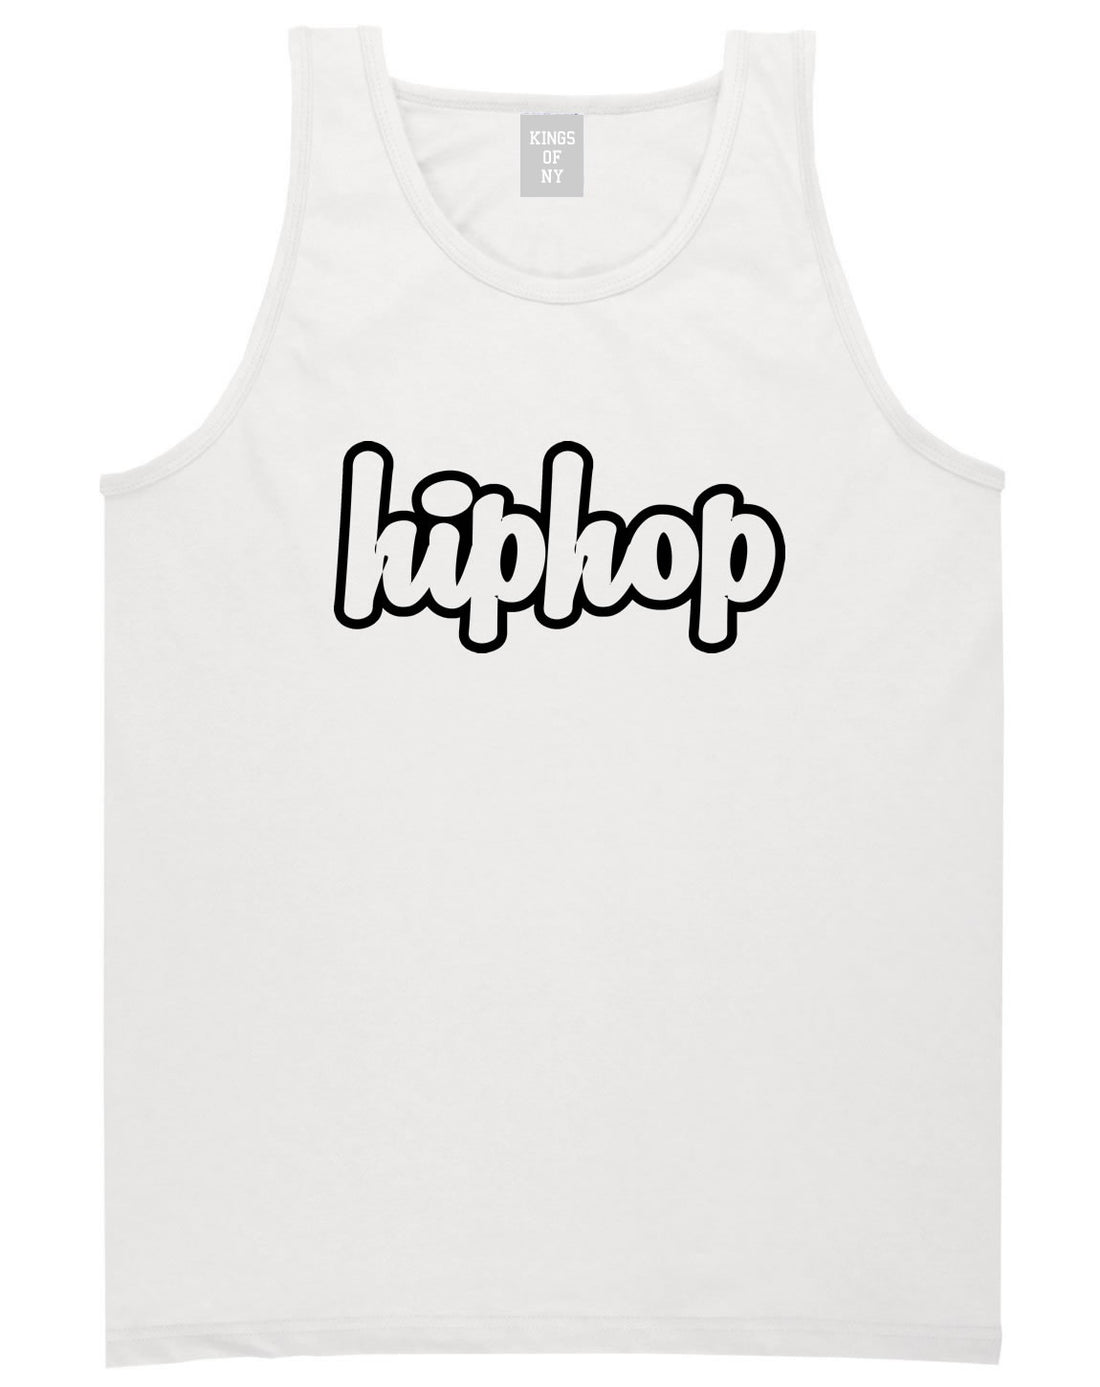 Hiphop Outline Old School Tank Top in White By Kings Of NY